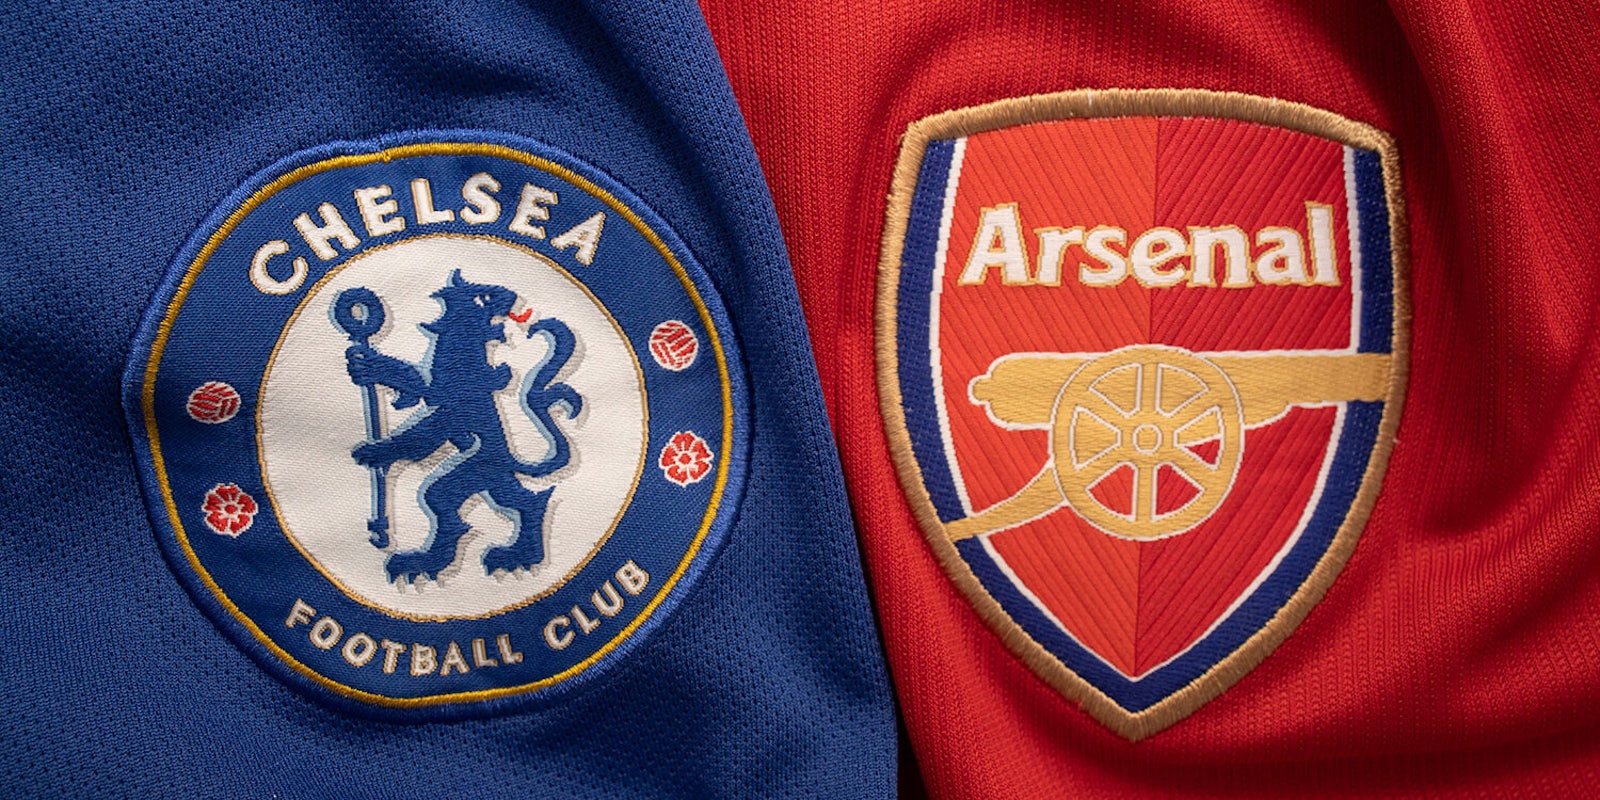 Arsenal and Chelsea logos